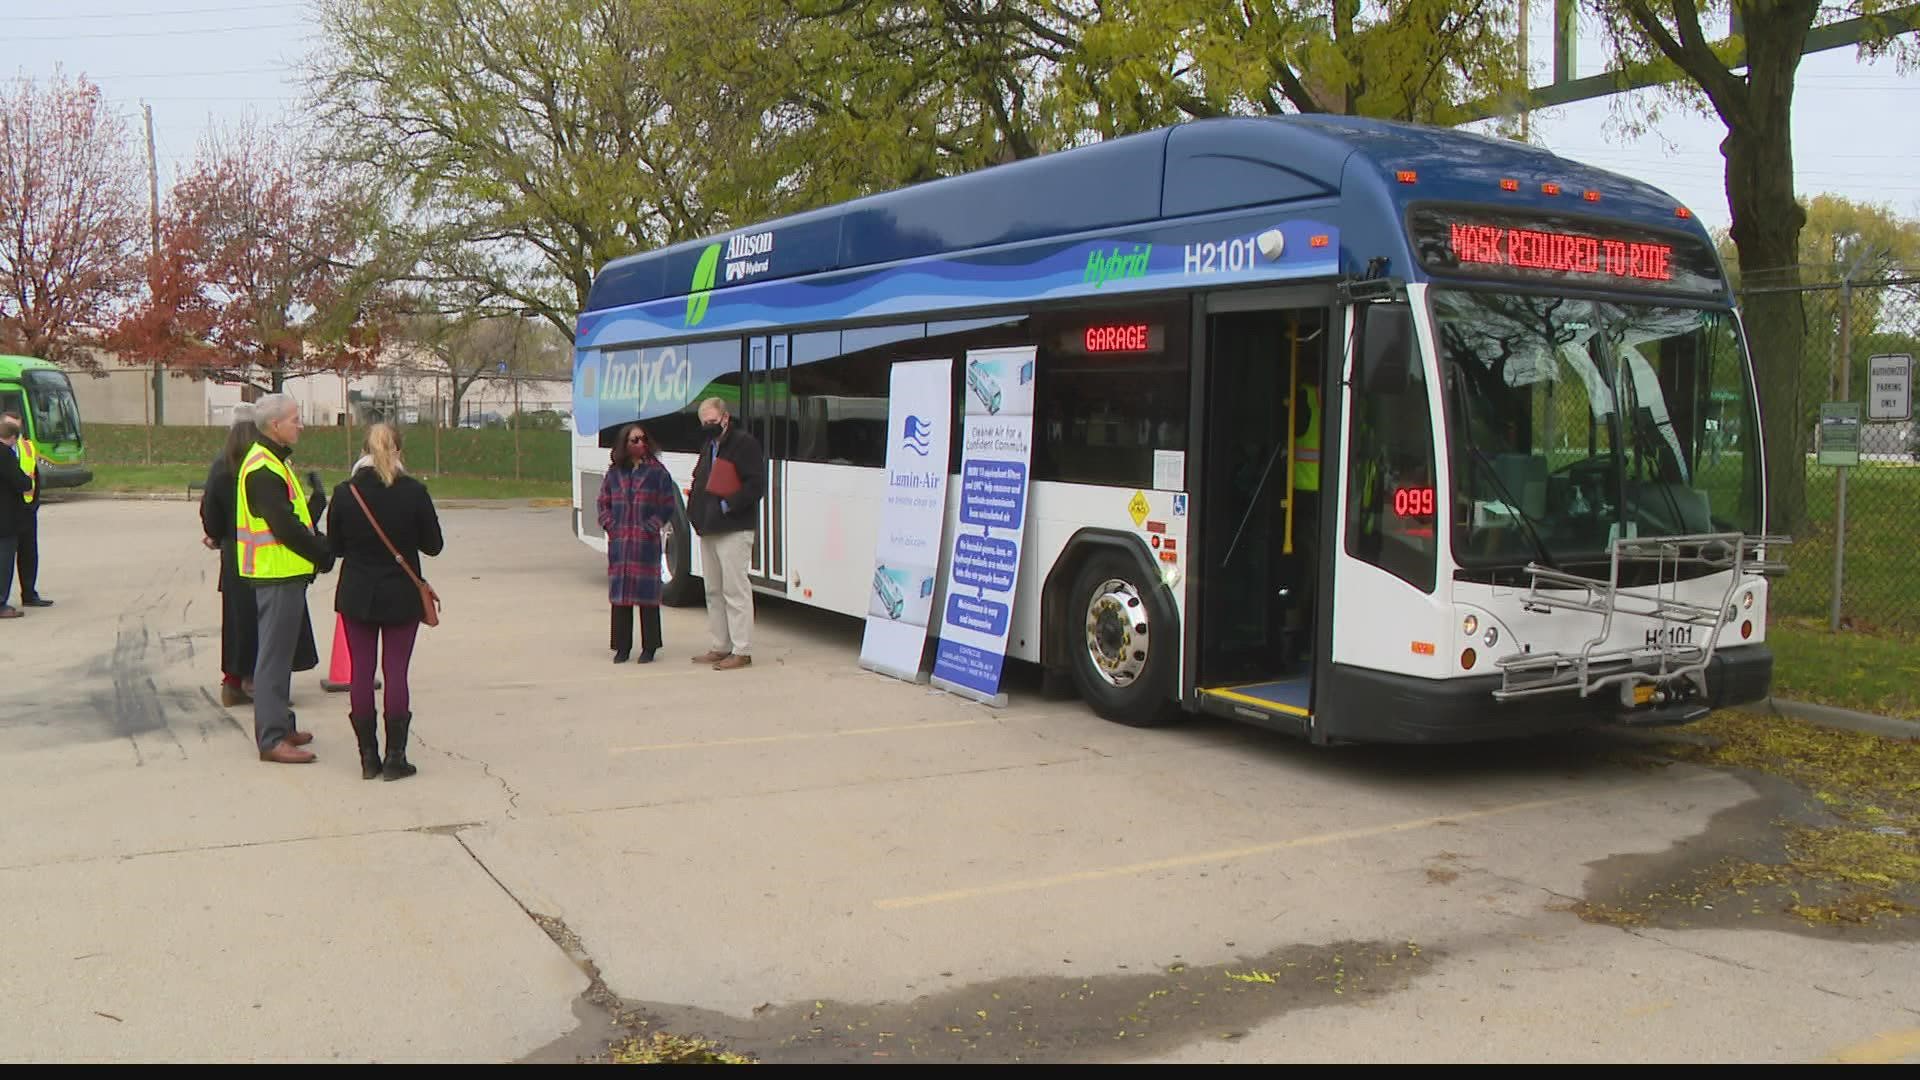 IndyGo wants make sure their buses are as safe as possible for their passengers and drivers.